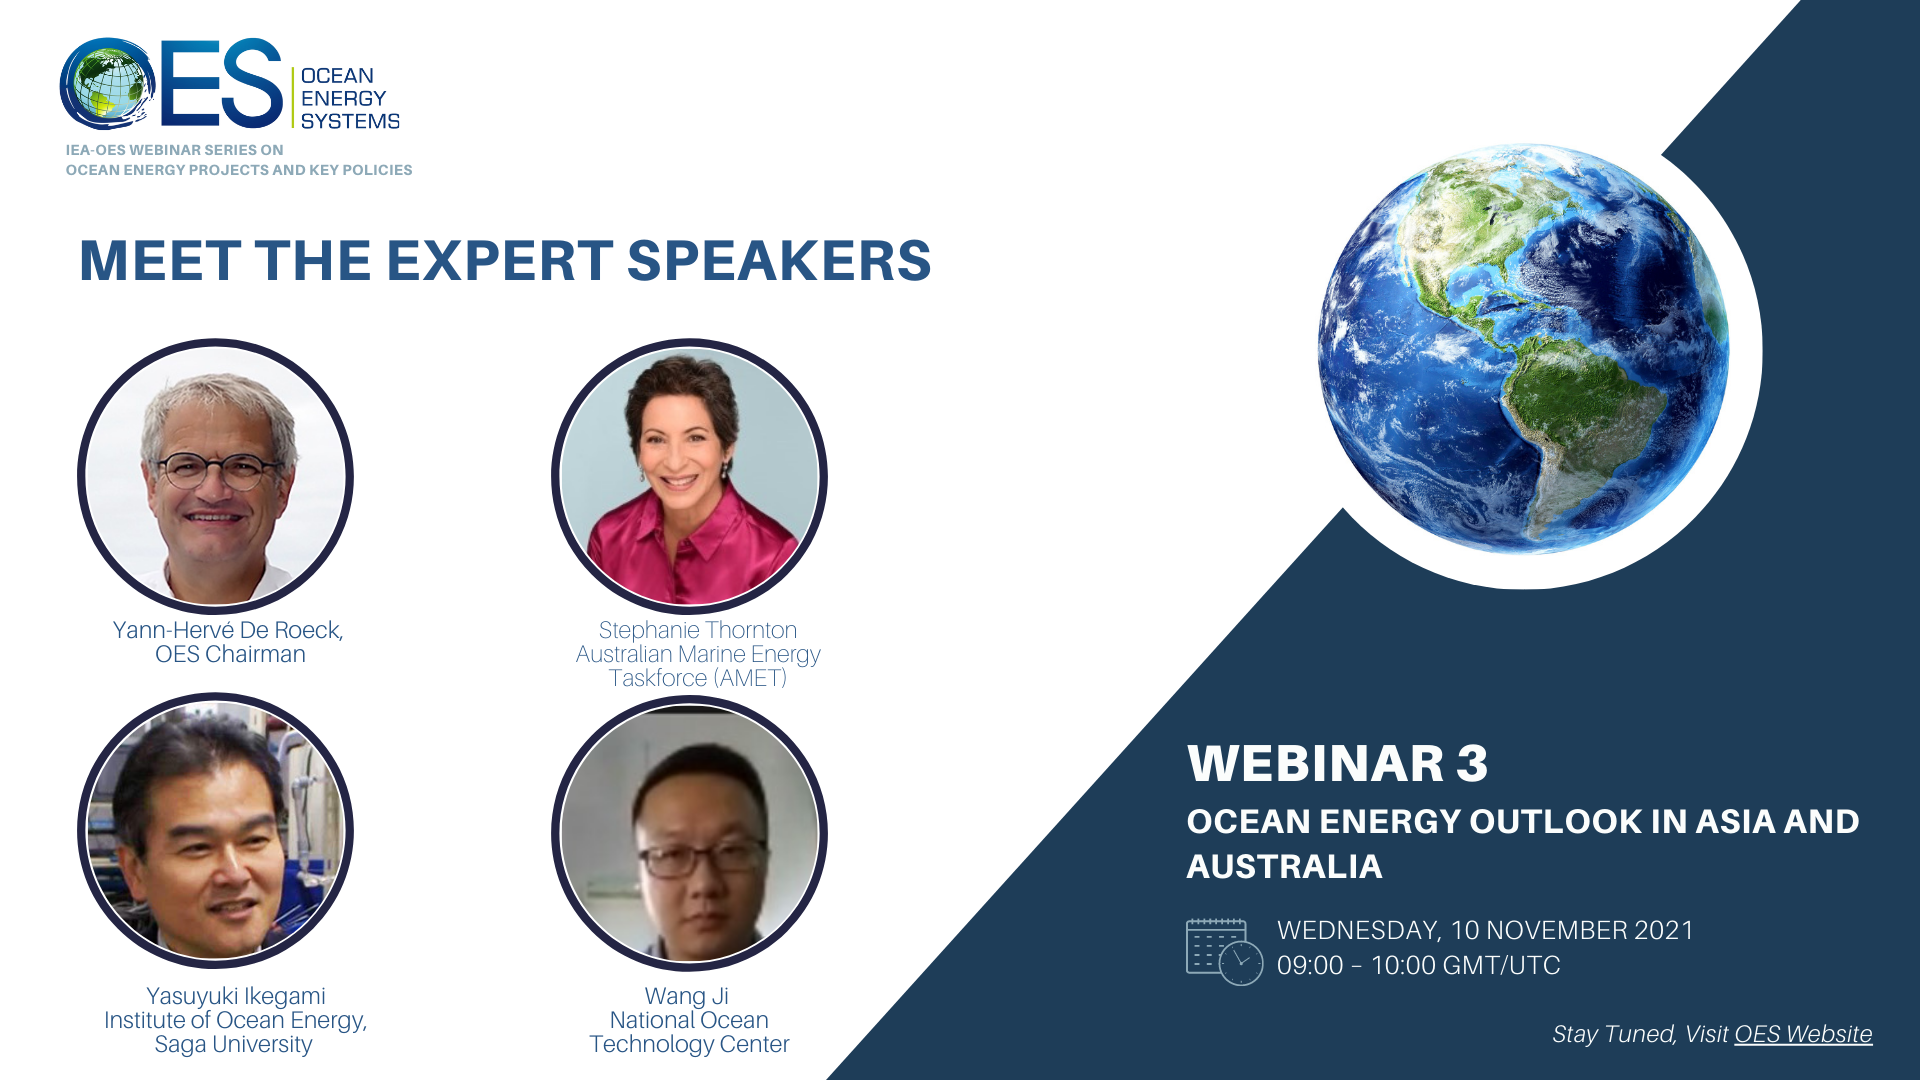 57586-iea-oes-webinar-series-on-ocean-energy-projects-and-key-policies-8-.png